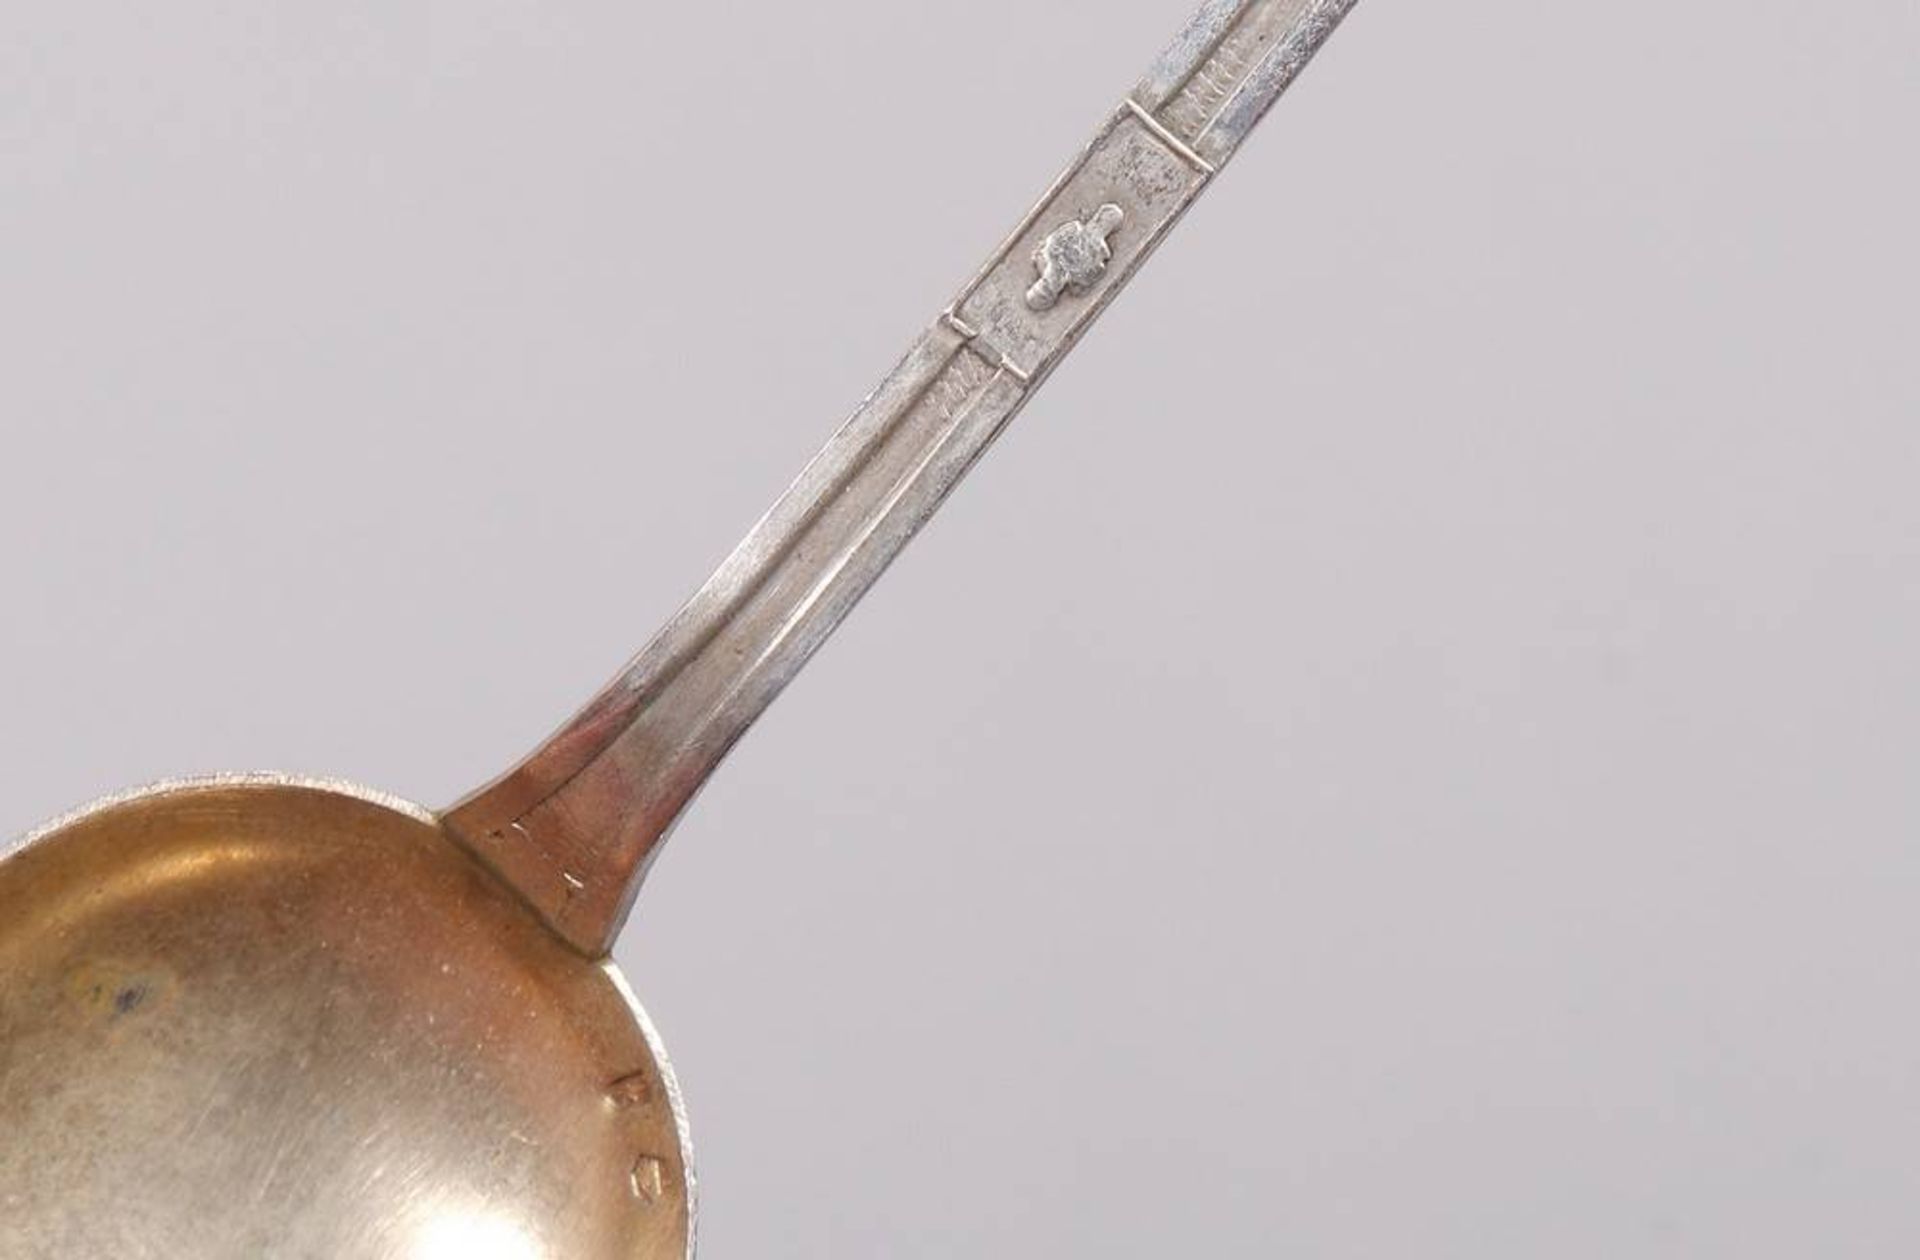 Set of grapefruit spoons in box, silver, France, c. 1900 - Image 4 of 5